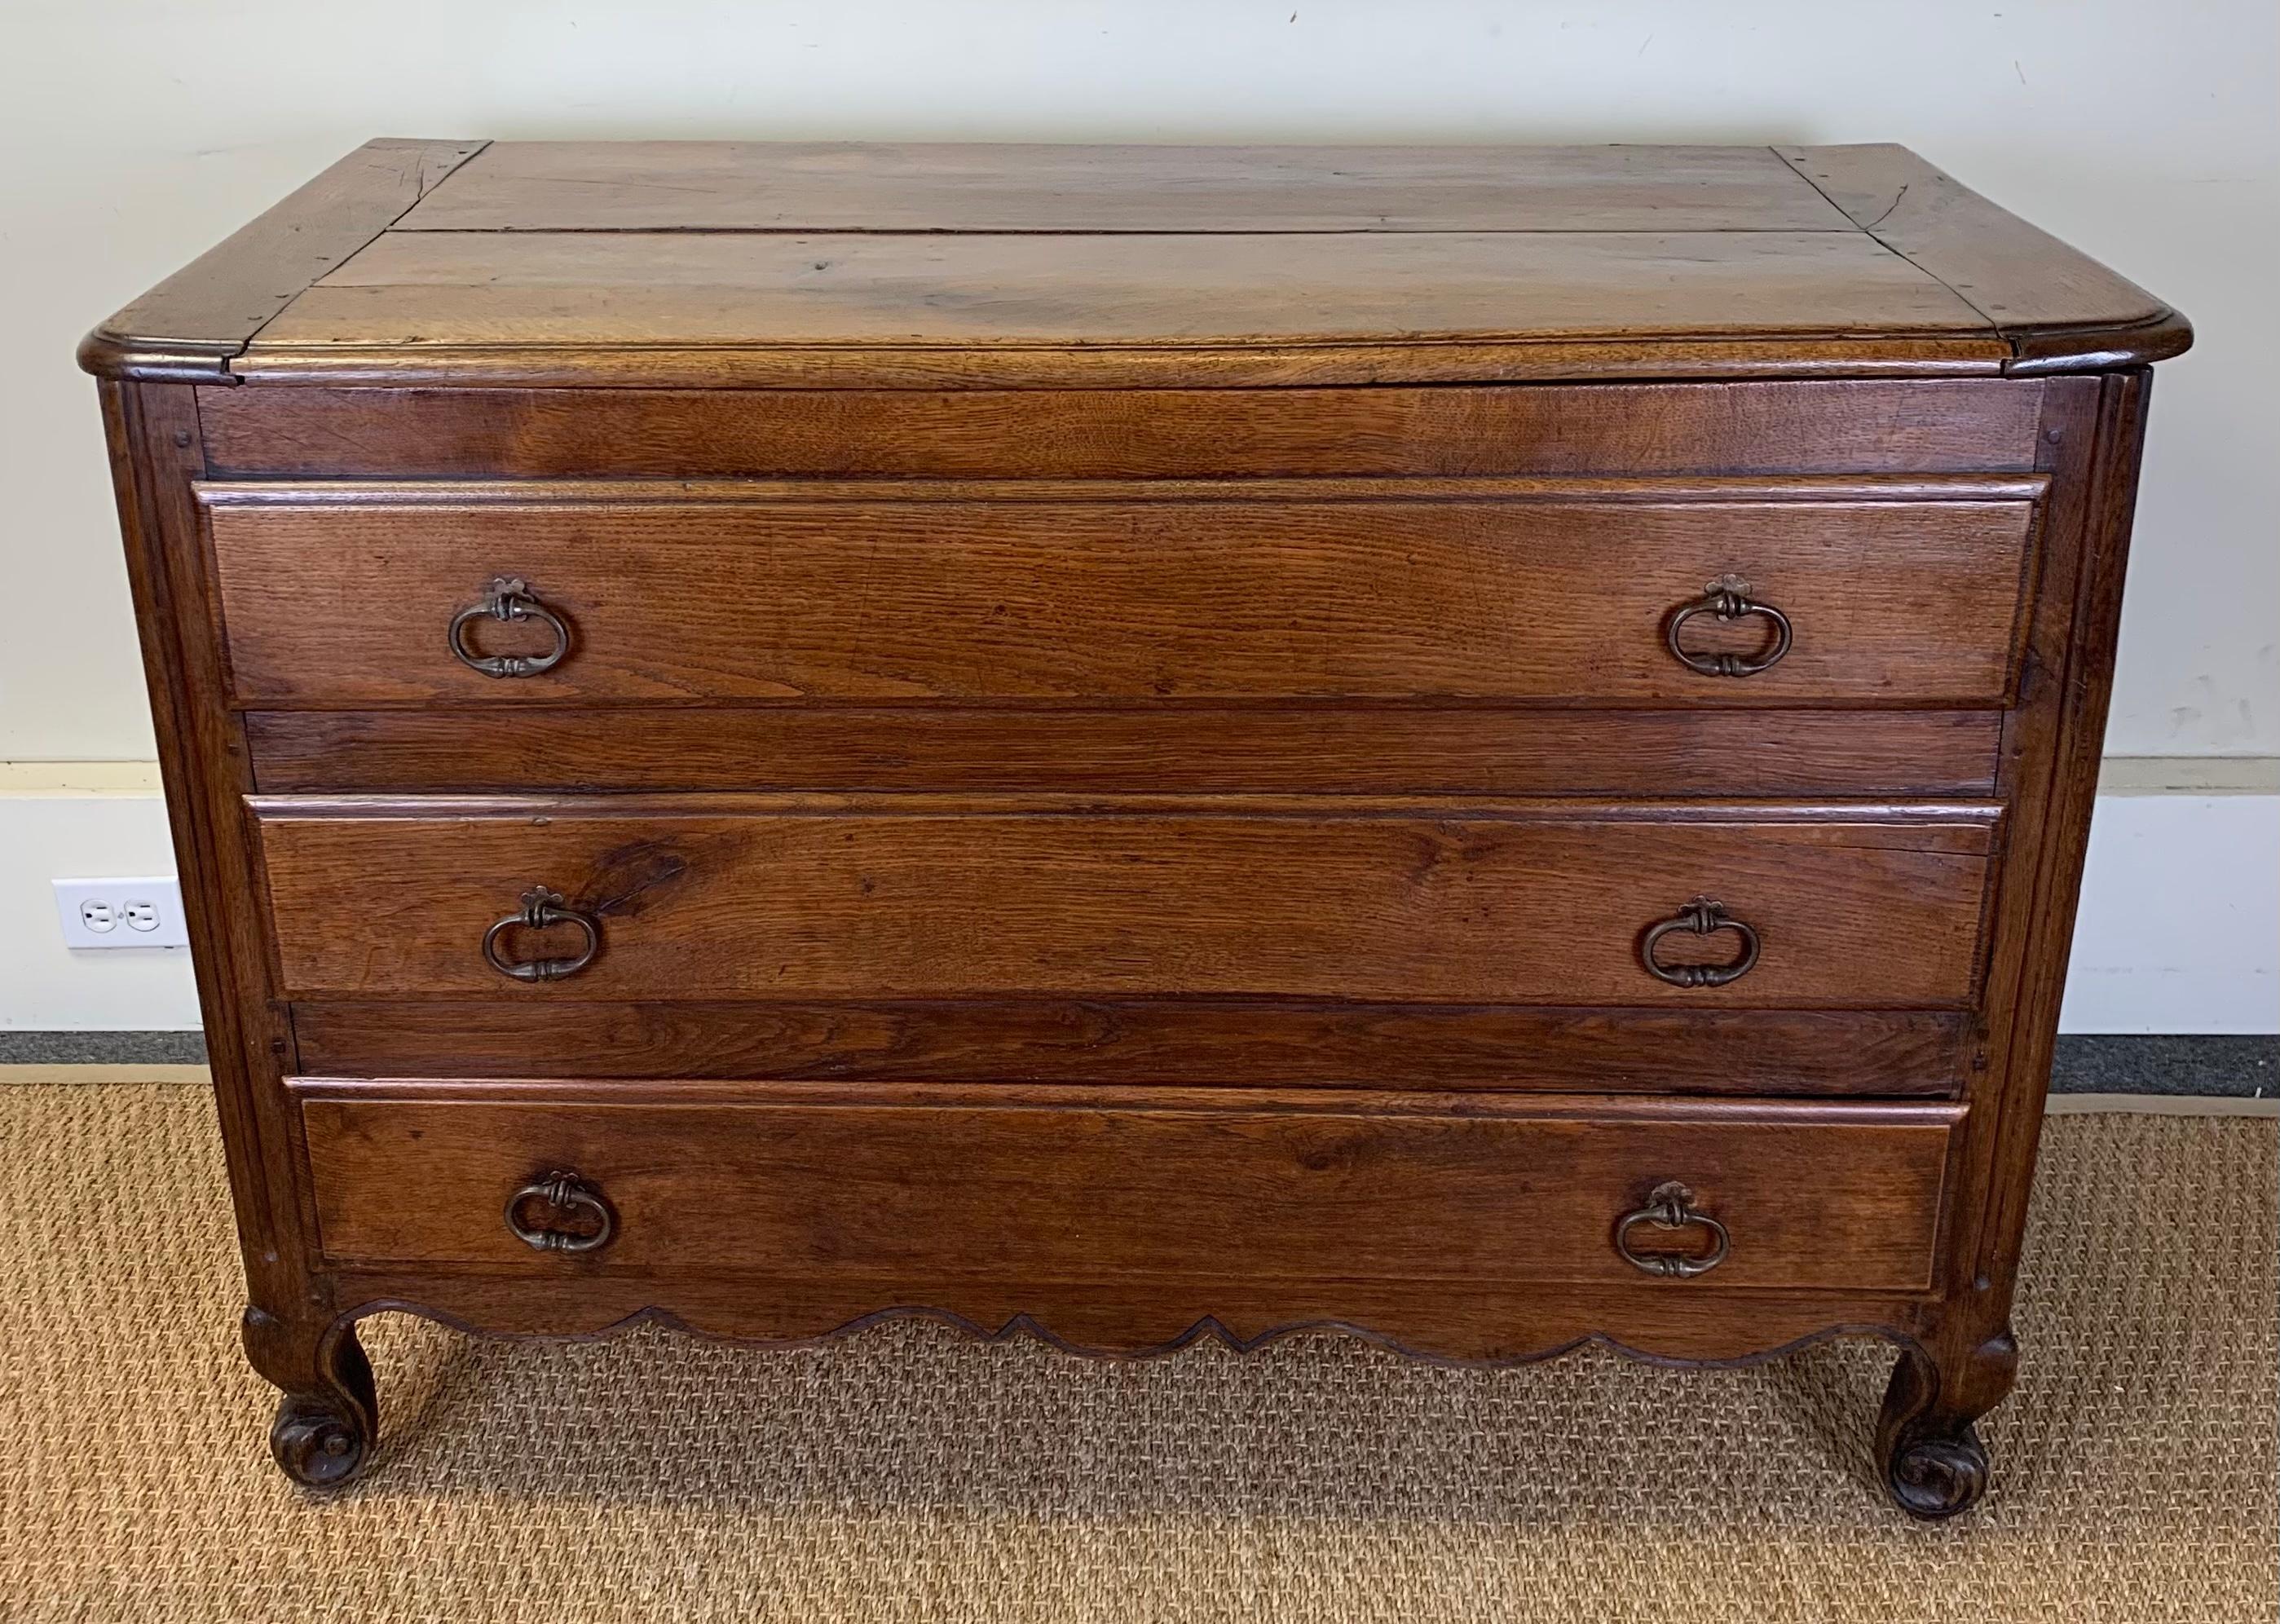 Late 18th C. oak French provincial blanket chest with two false drawers and one lower working drawer. The top opens to reveal deep storage for blankets and linens.